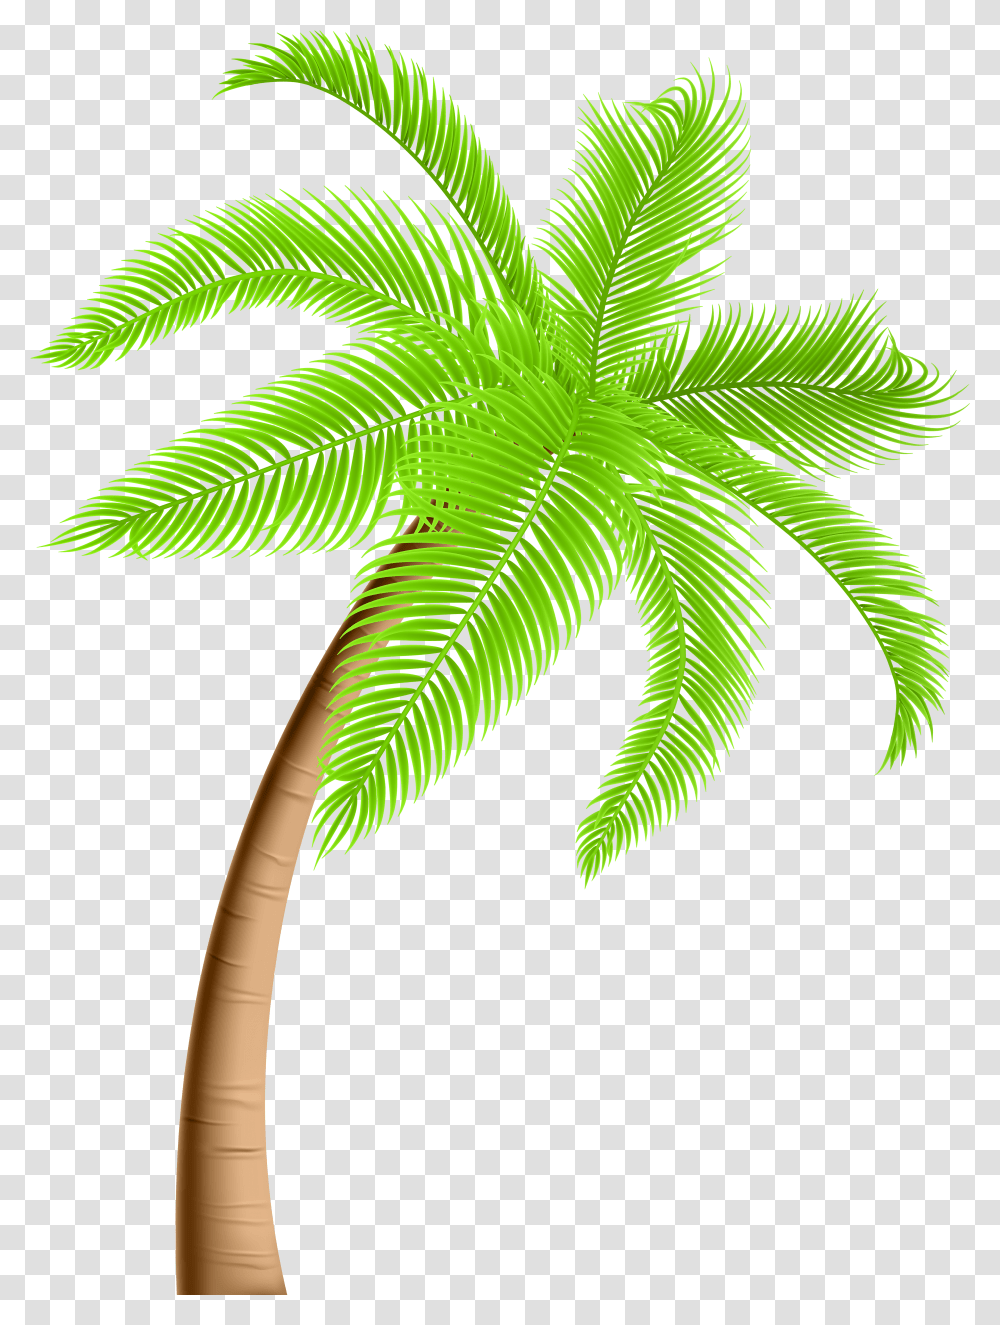 Library Of Palm Tree Jpg Freeuse Background Palm Tree Transparent Png